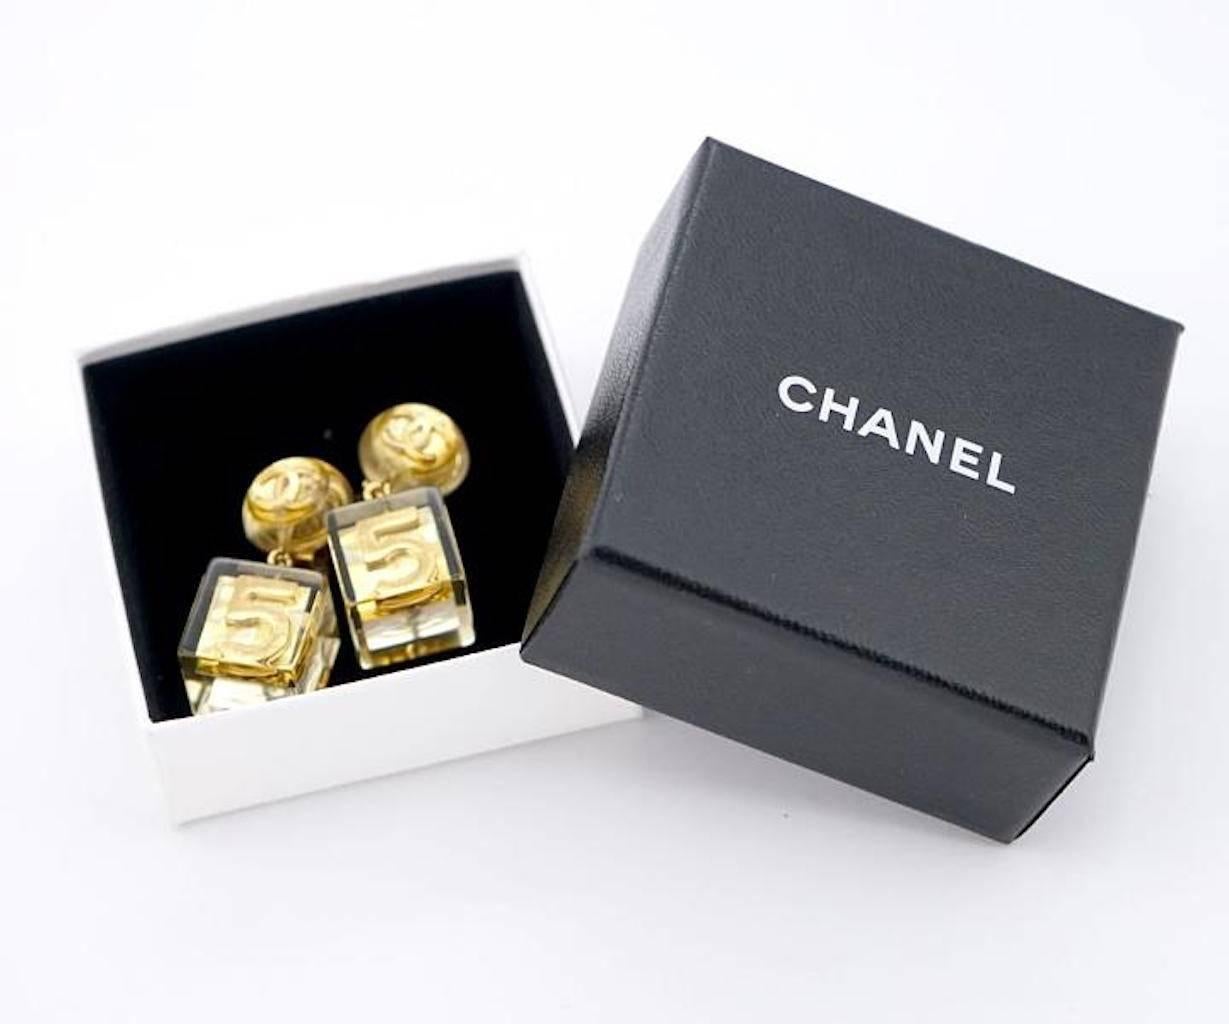 CURATOR'S NOTES

Turn heads this summer with these rare, statement Chanel No. 5 cube  earrings! Featuring gold and transparent colorblocking, these beauties are sure to turn heads!

Resin
Gold tone
Clip on closure
Made in France
Drop 1.5